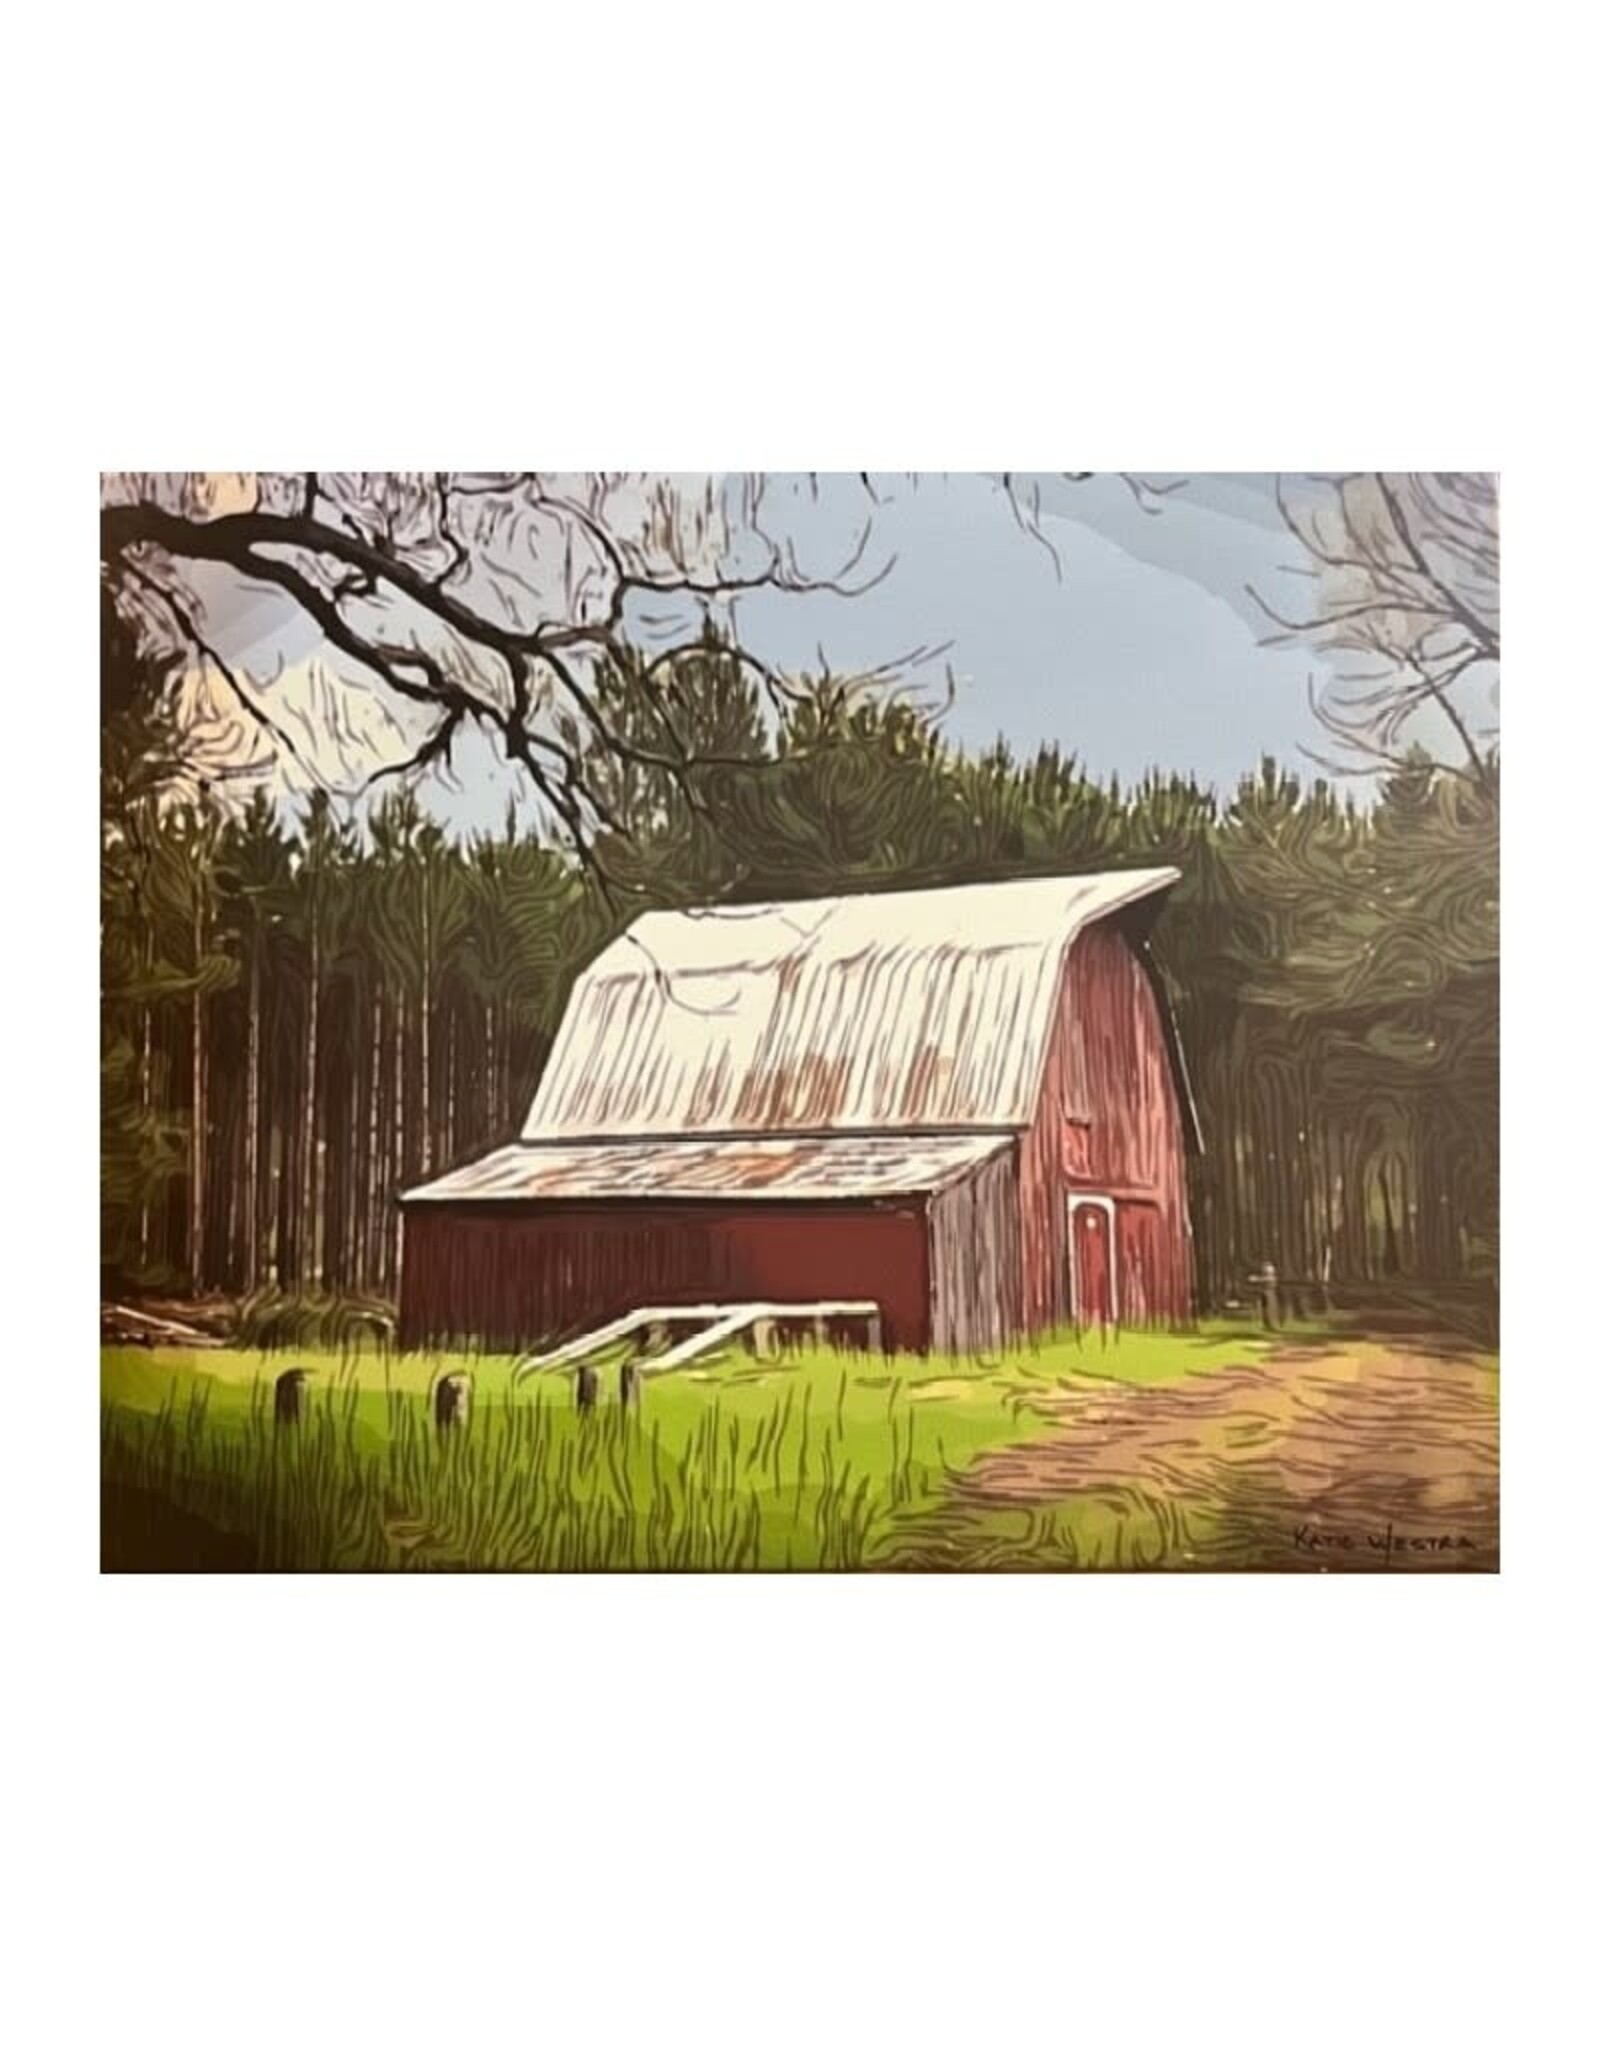 Red Barn - Katie Westra - 11x14 Canvas Wrap - The Bear Den Gallery